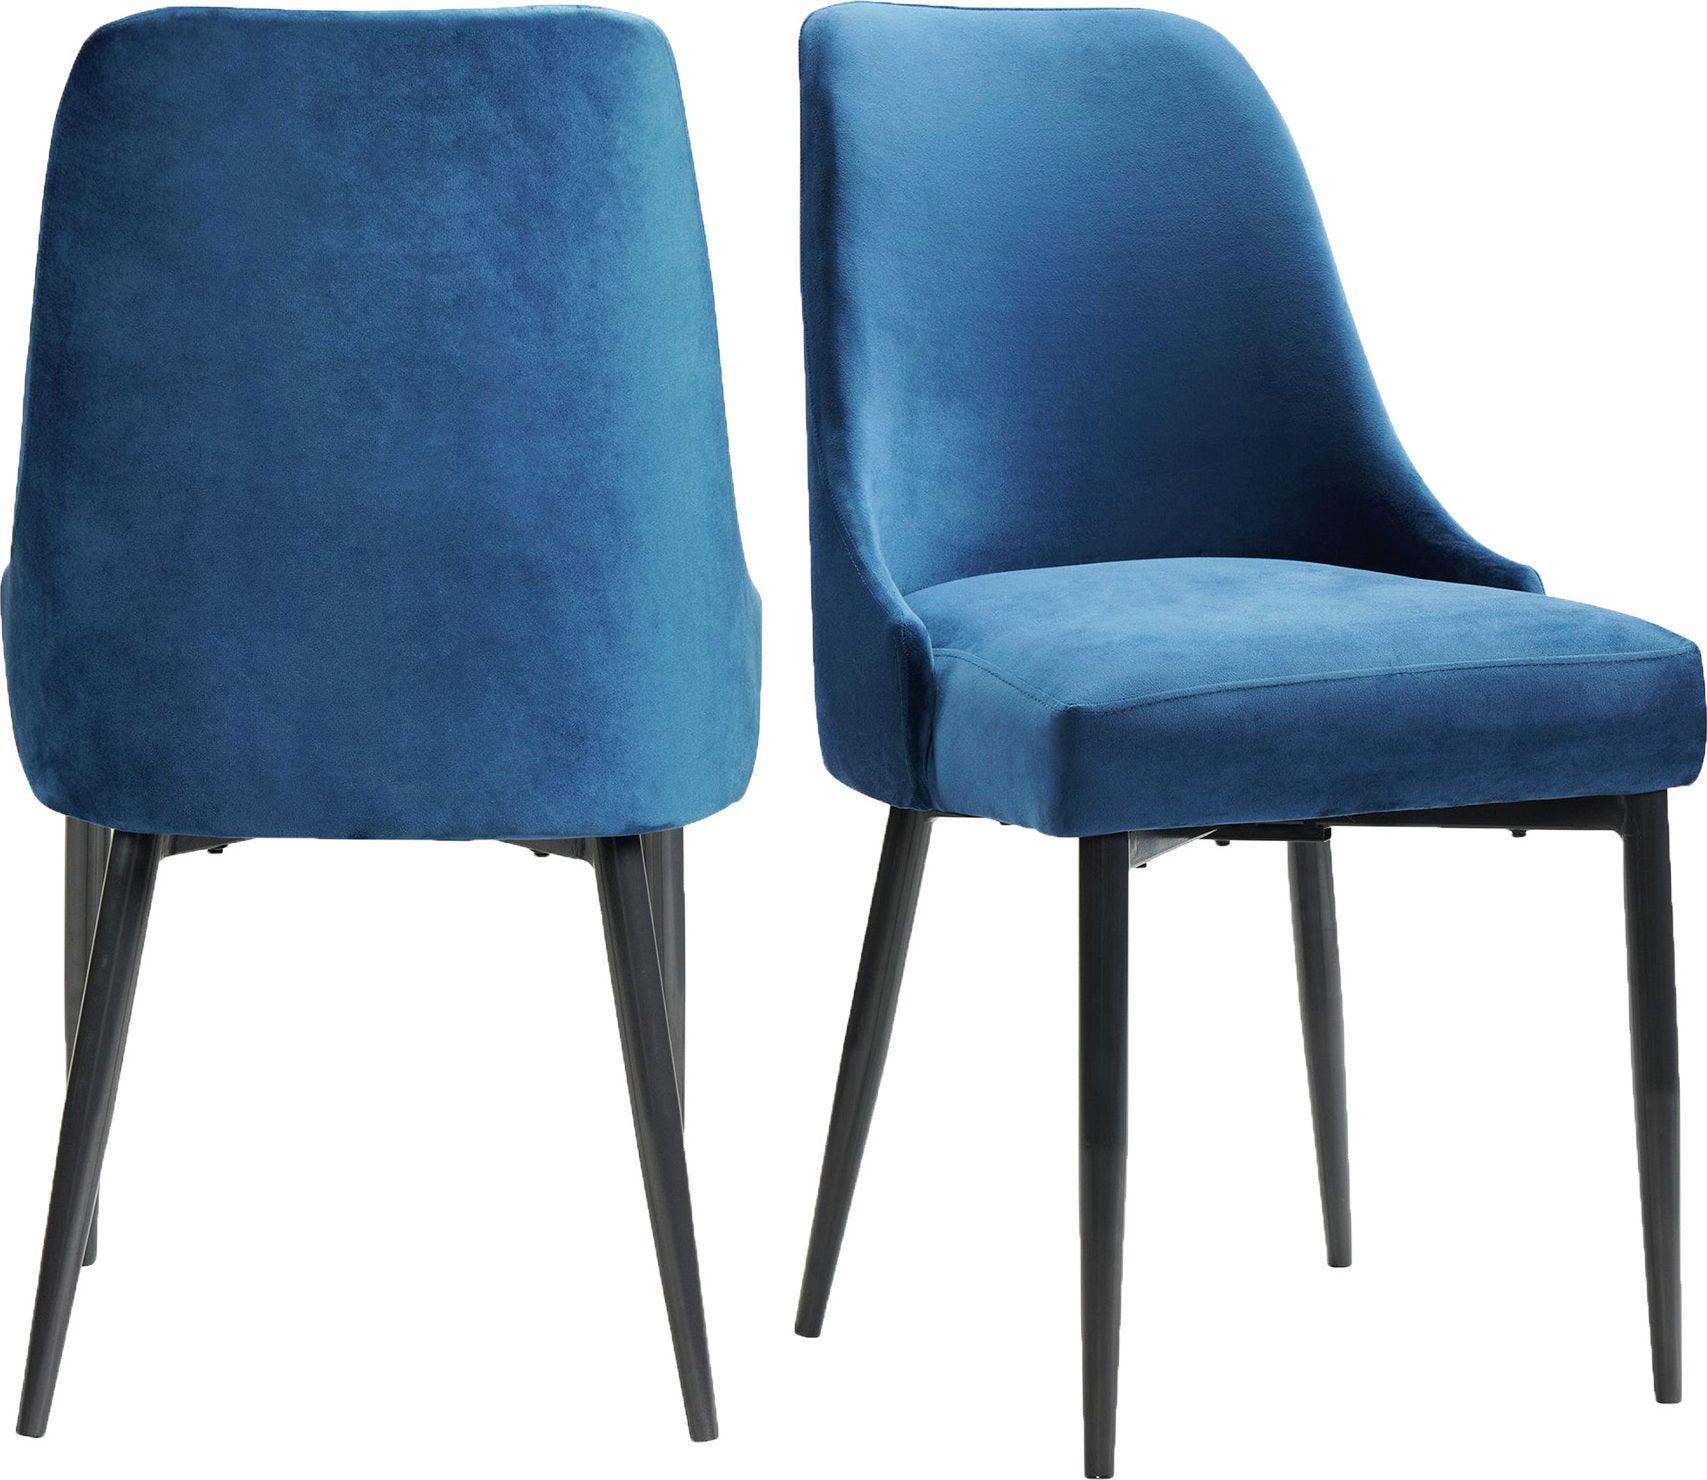 Elements Dining Chairs - Mardelle Dining Side Chair Set in Blue (Set of 2)